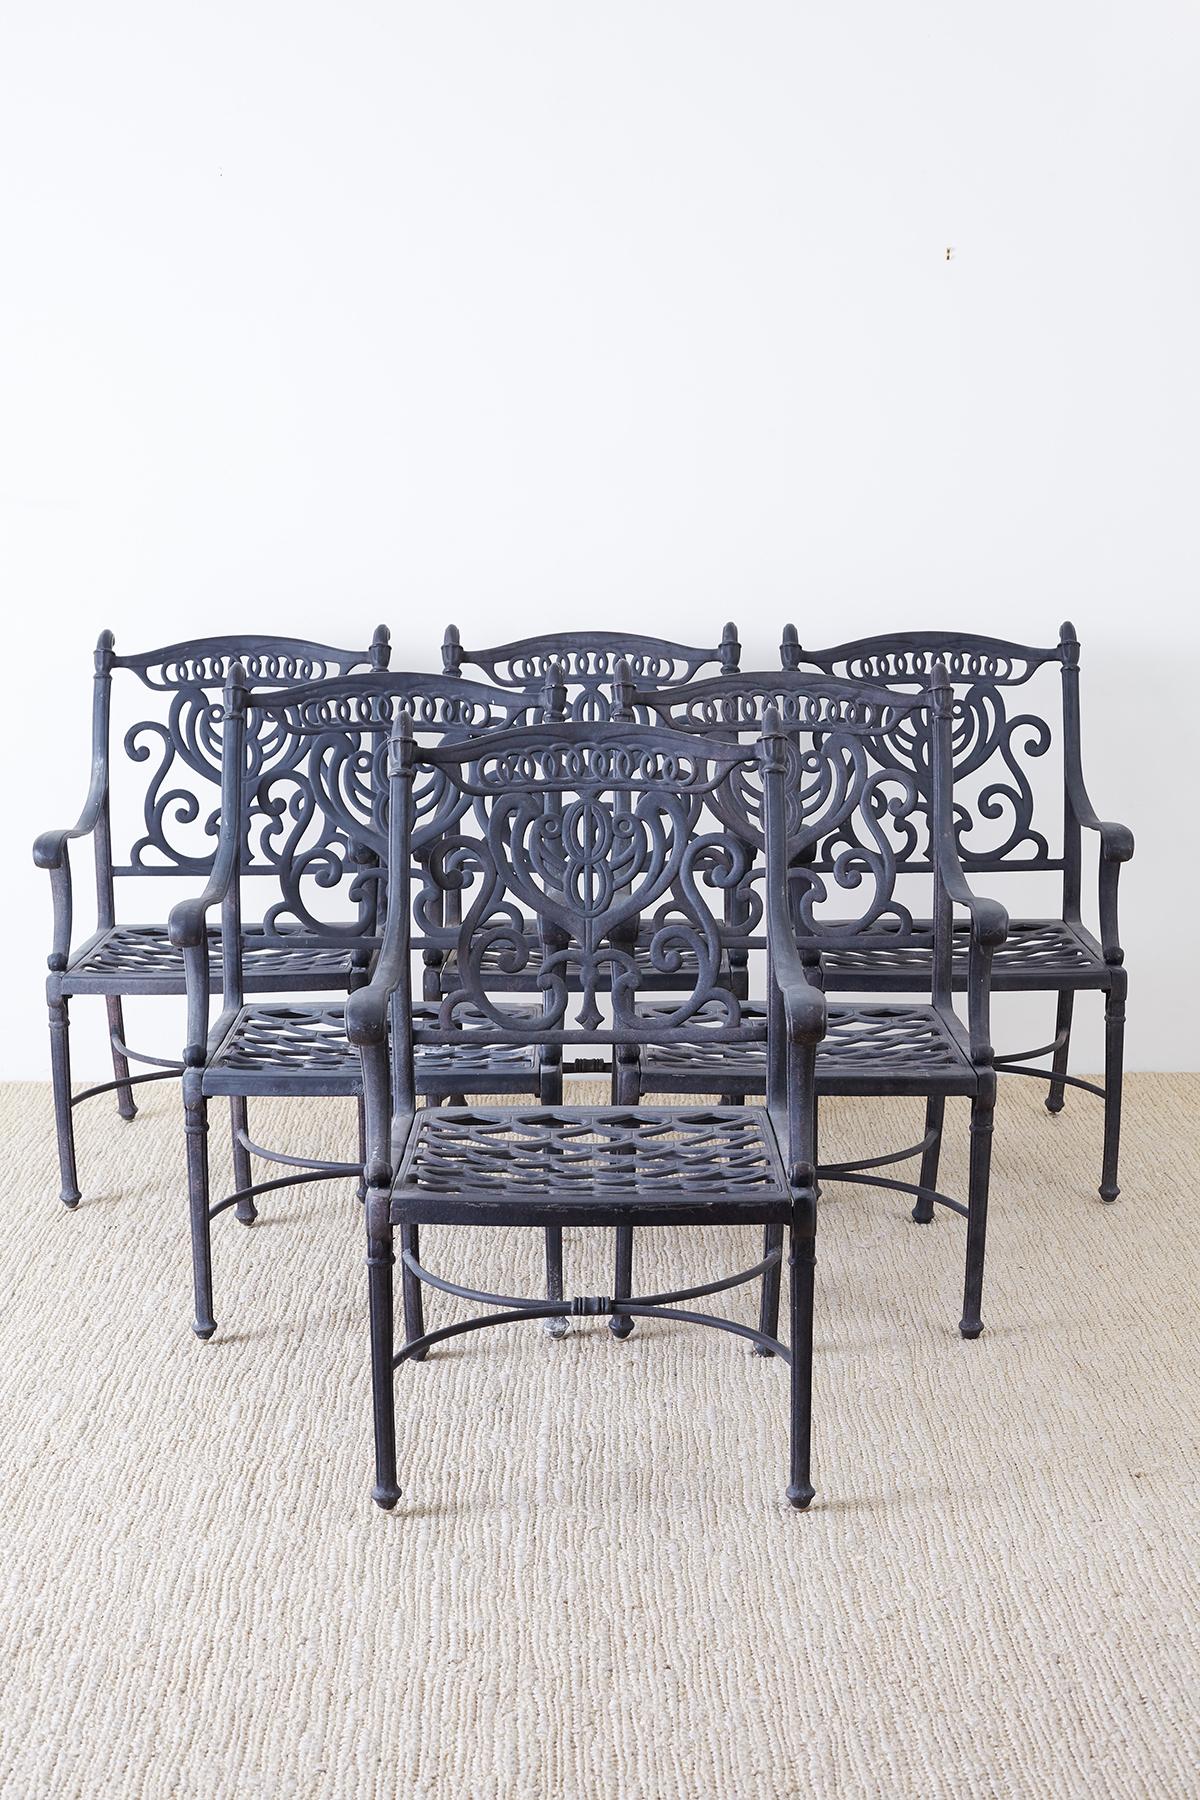 Fine set of six cast iron patio or garden chairs made in the neoclassical taste. Featuring a decorative scrolled lyre design on the back and graceful curved arms. Solid and heavy made in the U.S. with excellent joinery and craftsmanship. From an